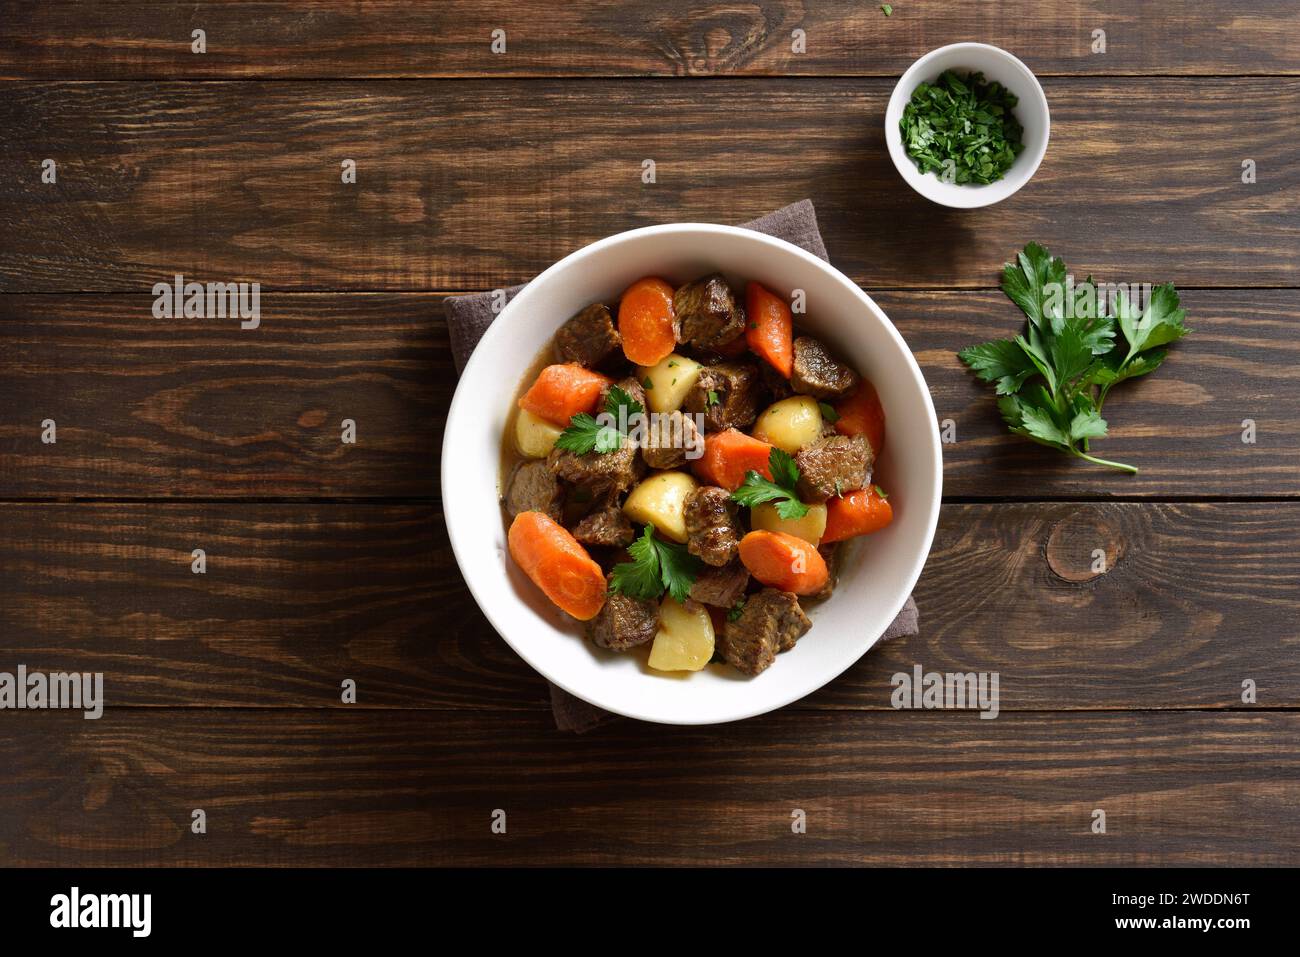 Beef meat stewed with potatoes, carrots and spices in white bowl over wooden background. Comfort healthy food for dinner. Top view, flat lay Stock Photo